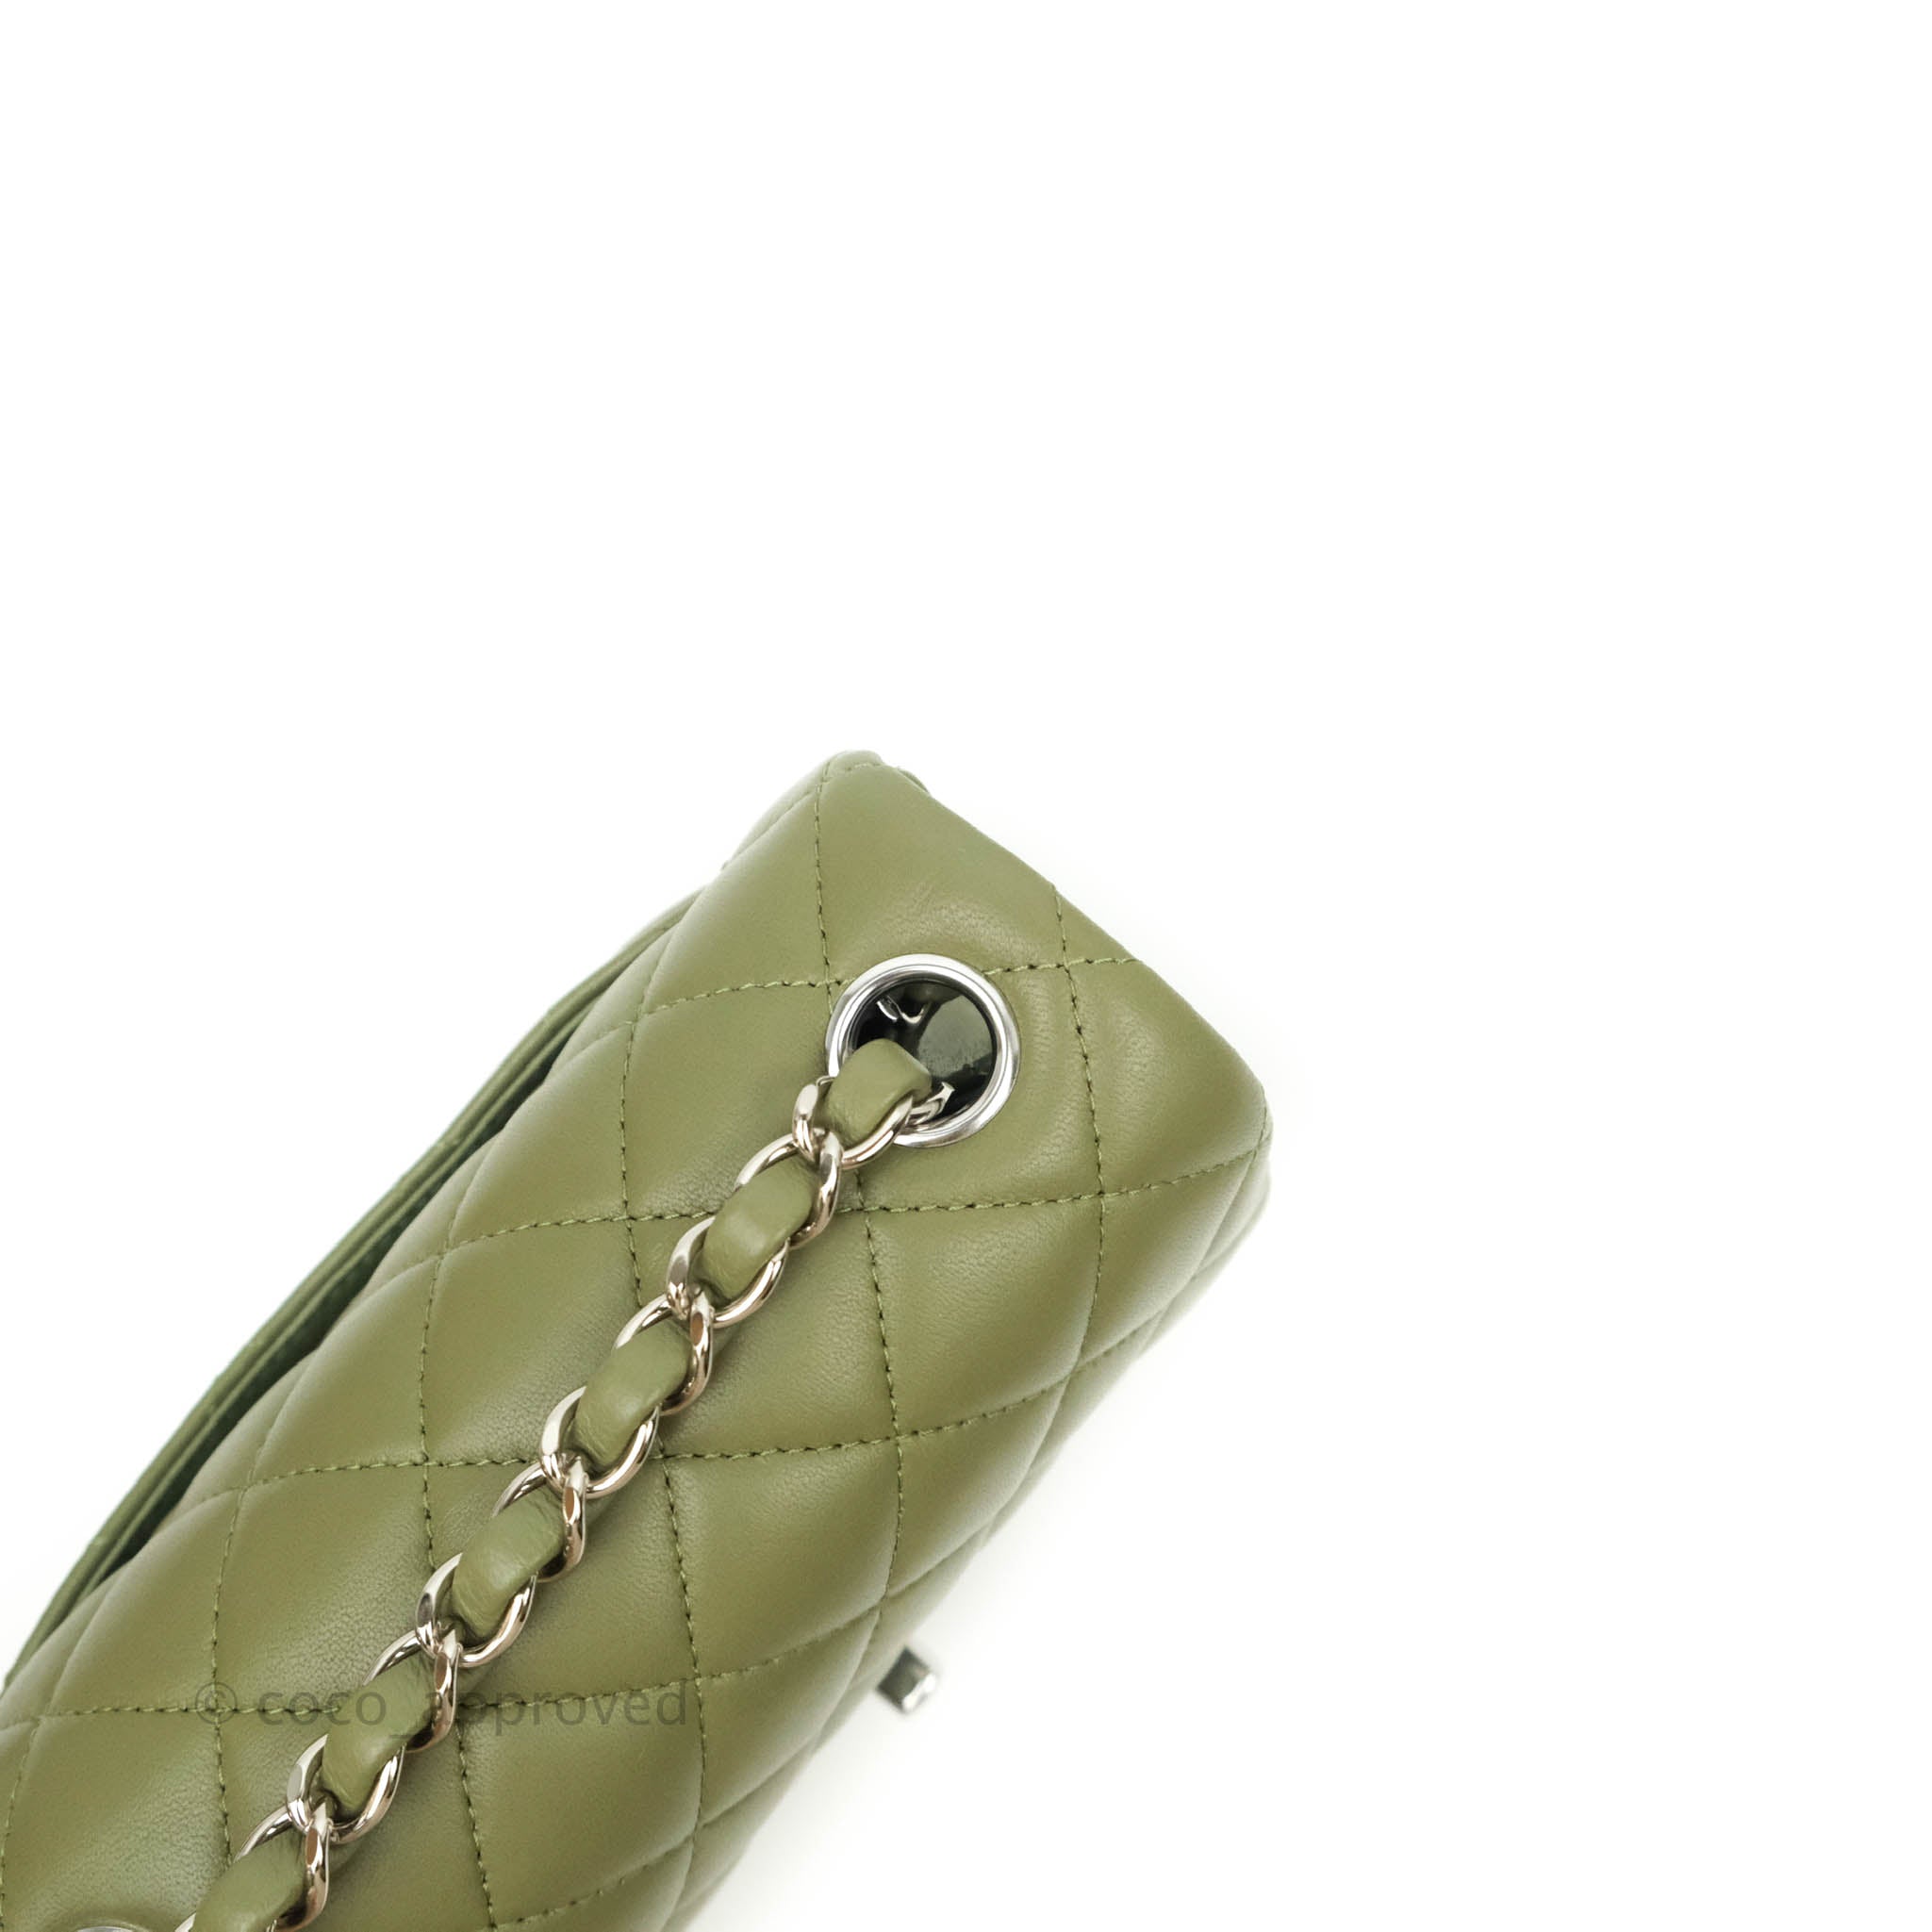 Timeless/classique leather crossbody bag Chanel Green in Leather